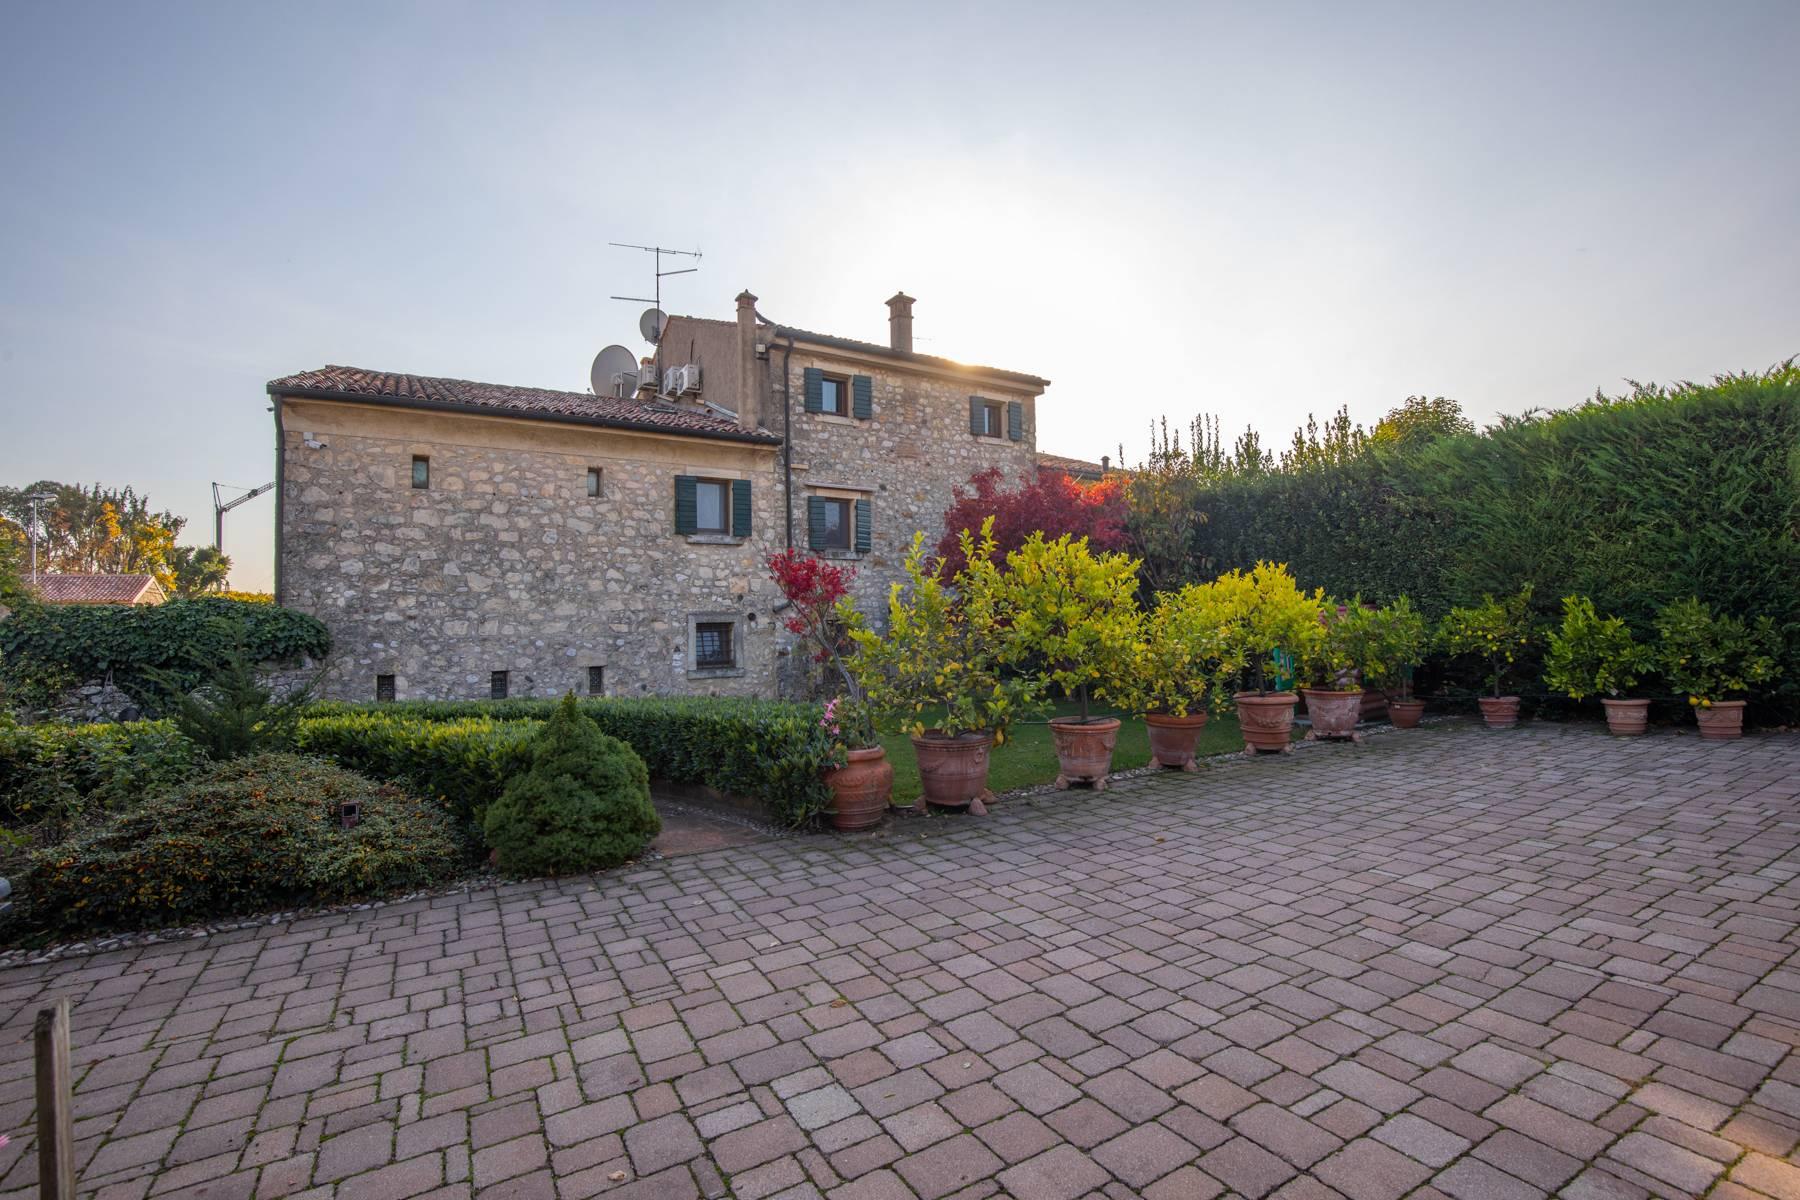 Stunning farmhouse surrounded by vineyards in the Valpolicella area - 6